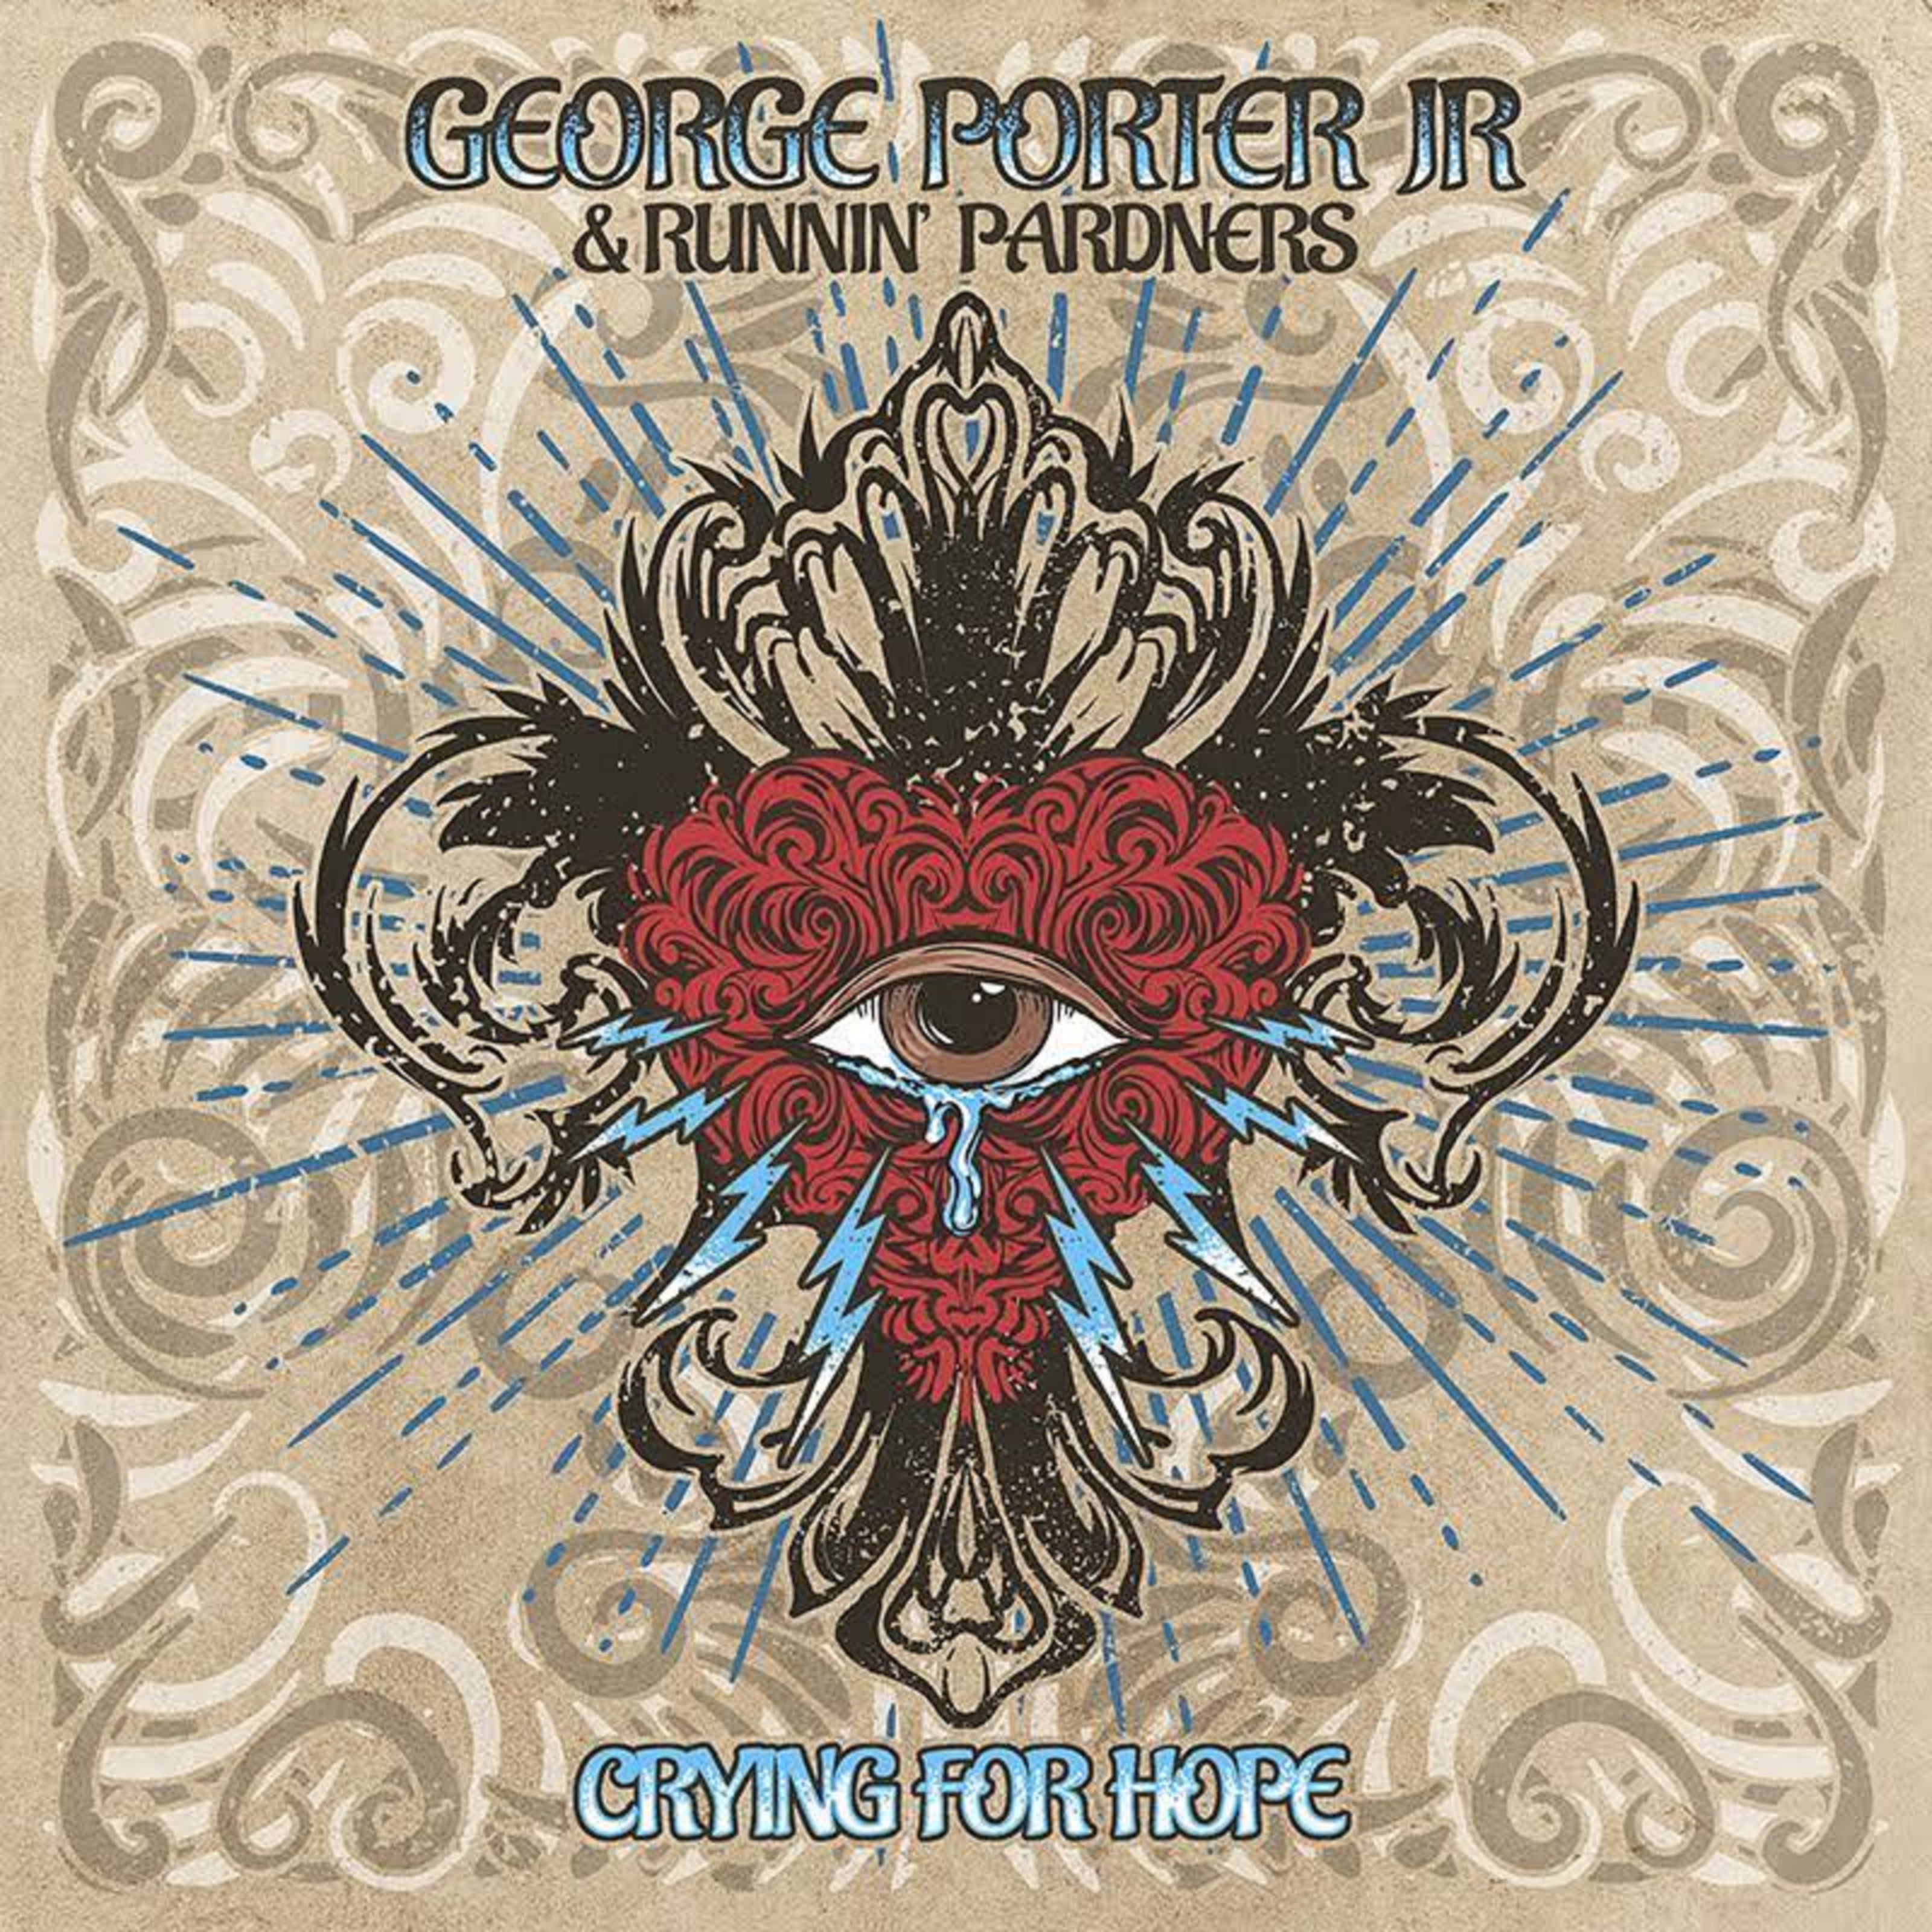 George Porter Jr and his Runnin Pardners Release New Single "Crying For Hope